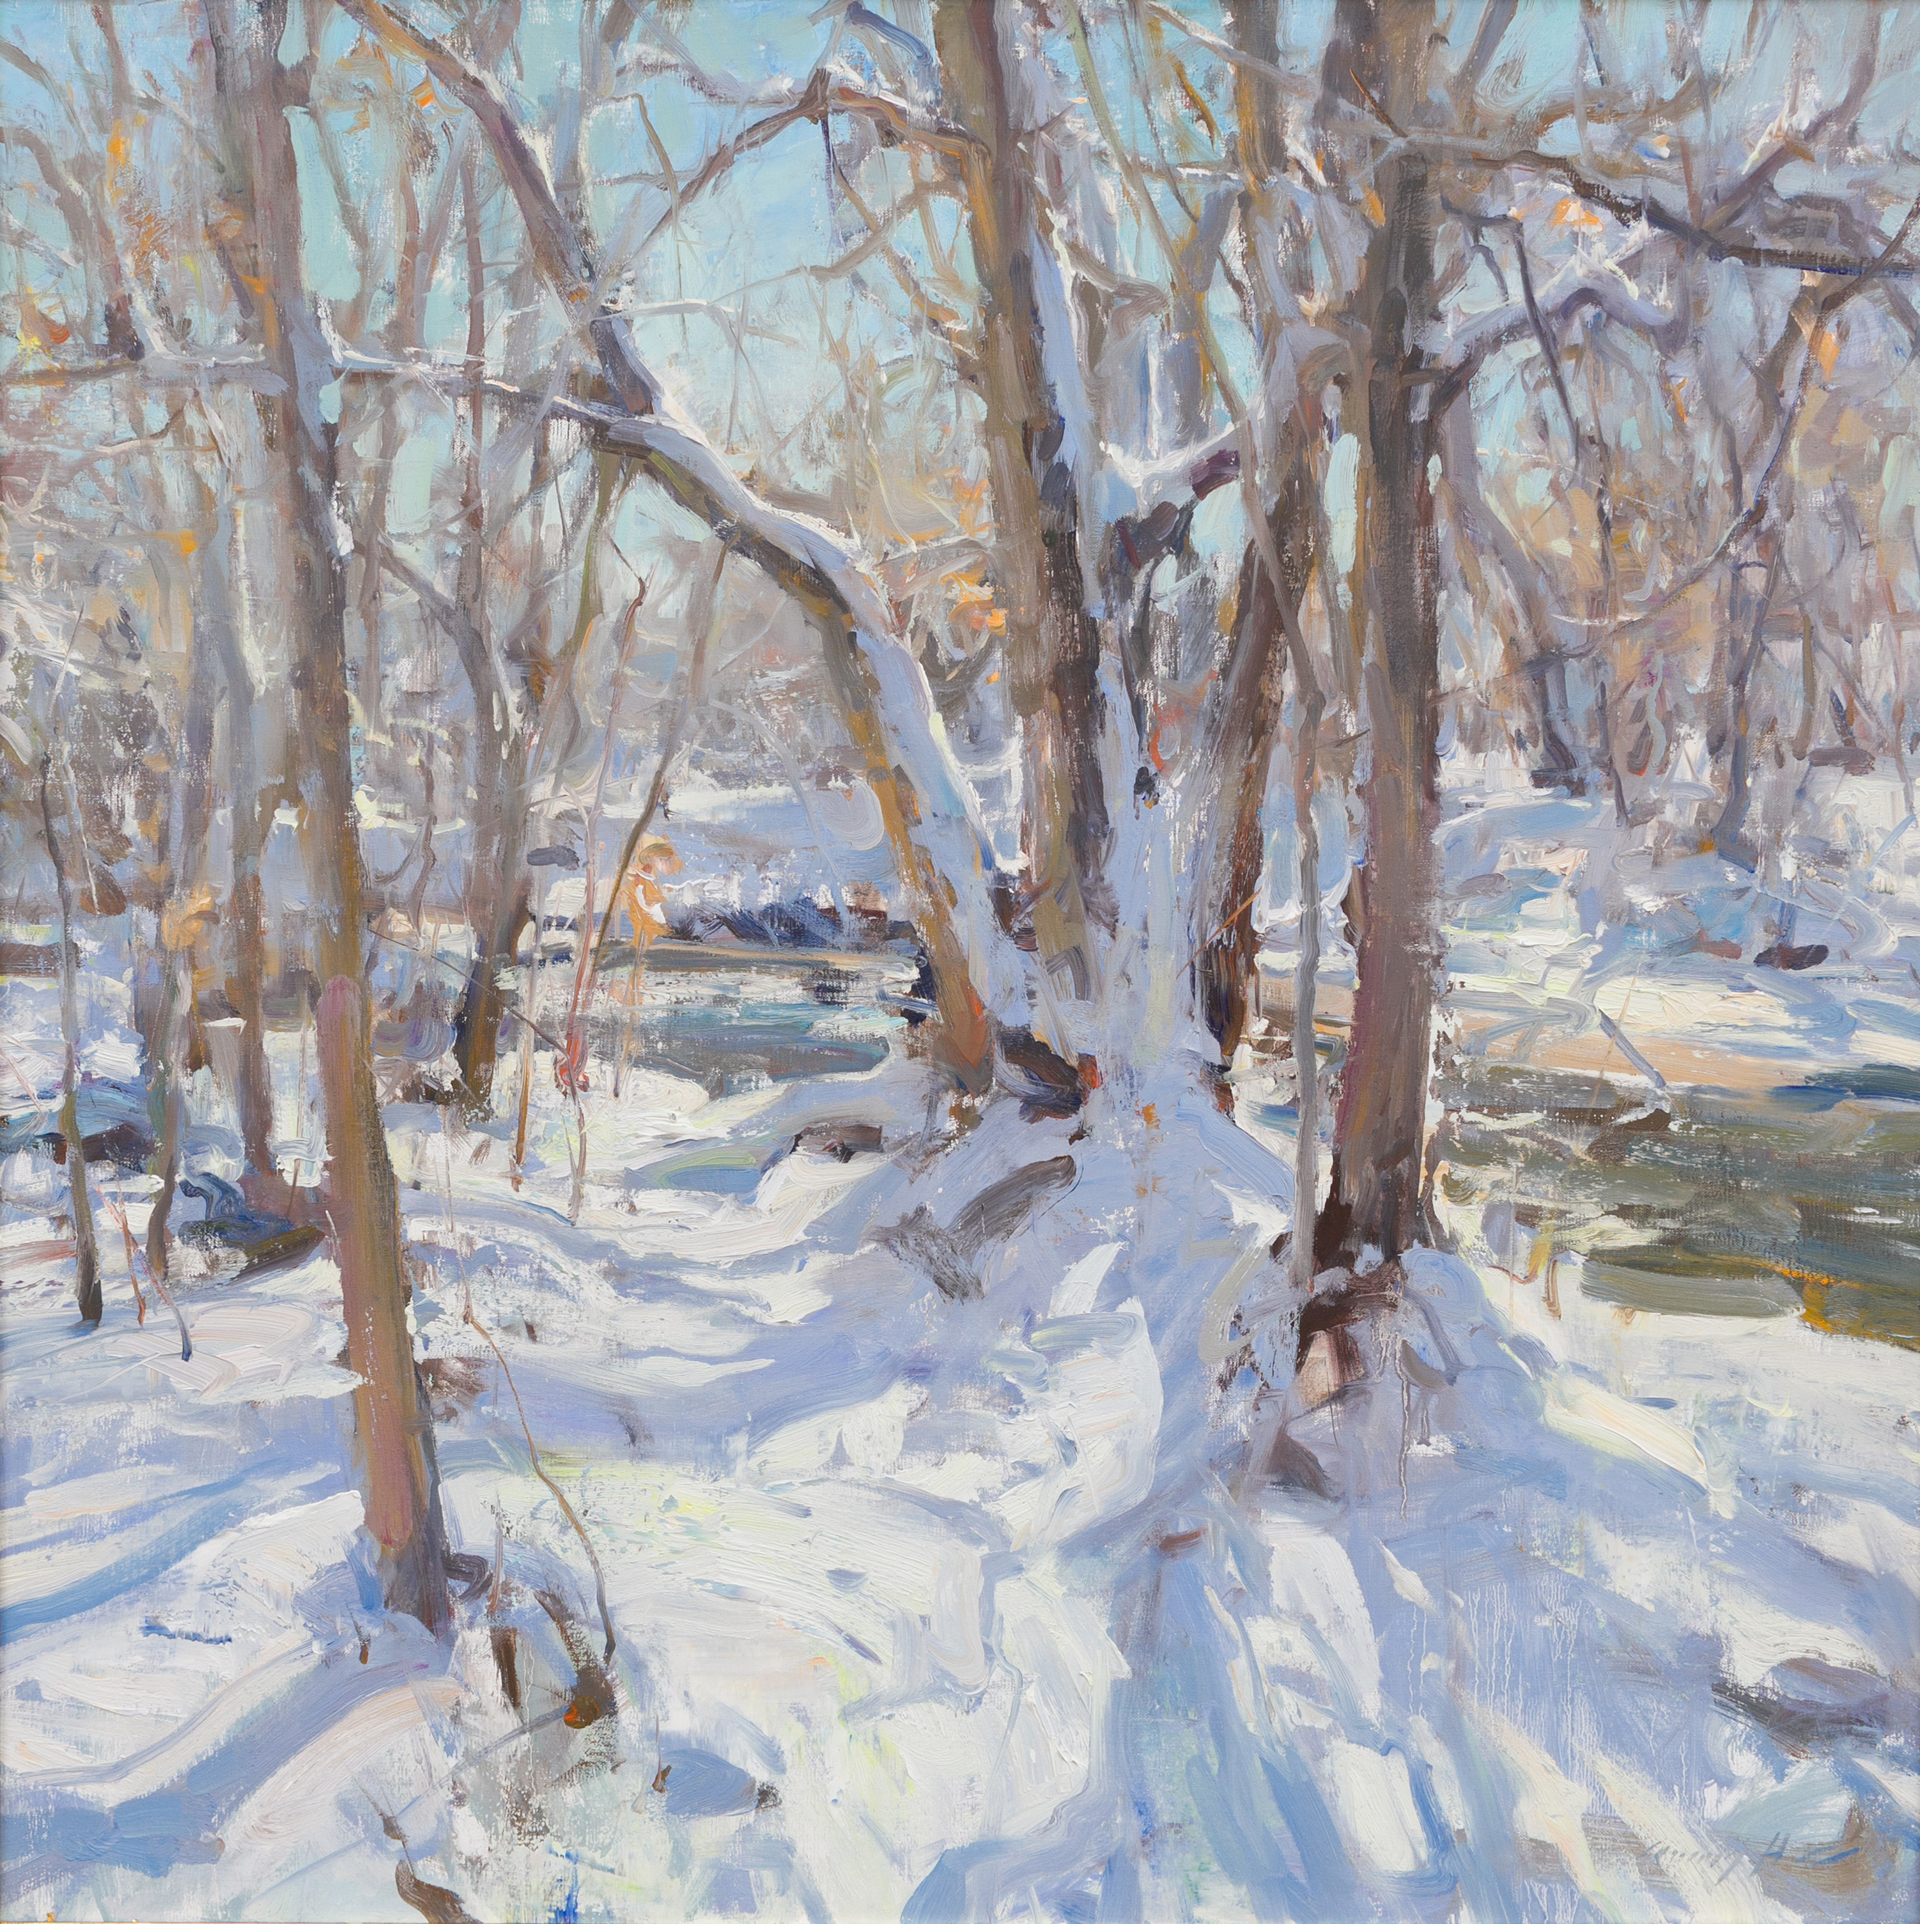 Winter on Bear Creek by Quang Ho